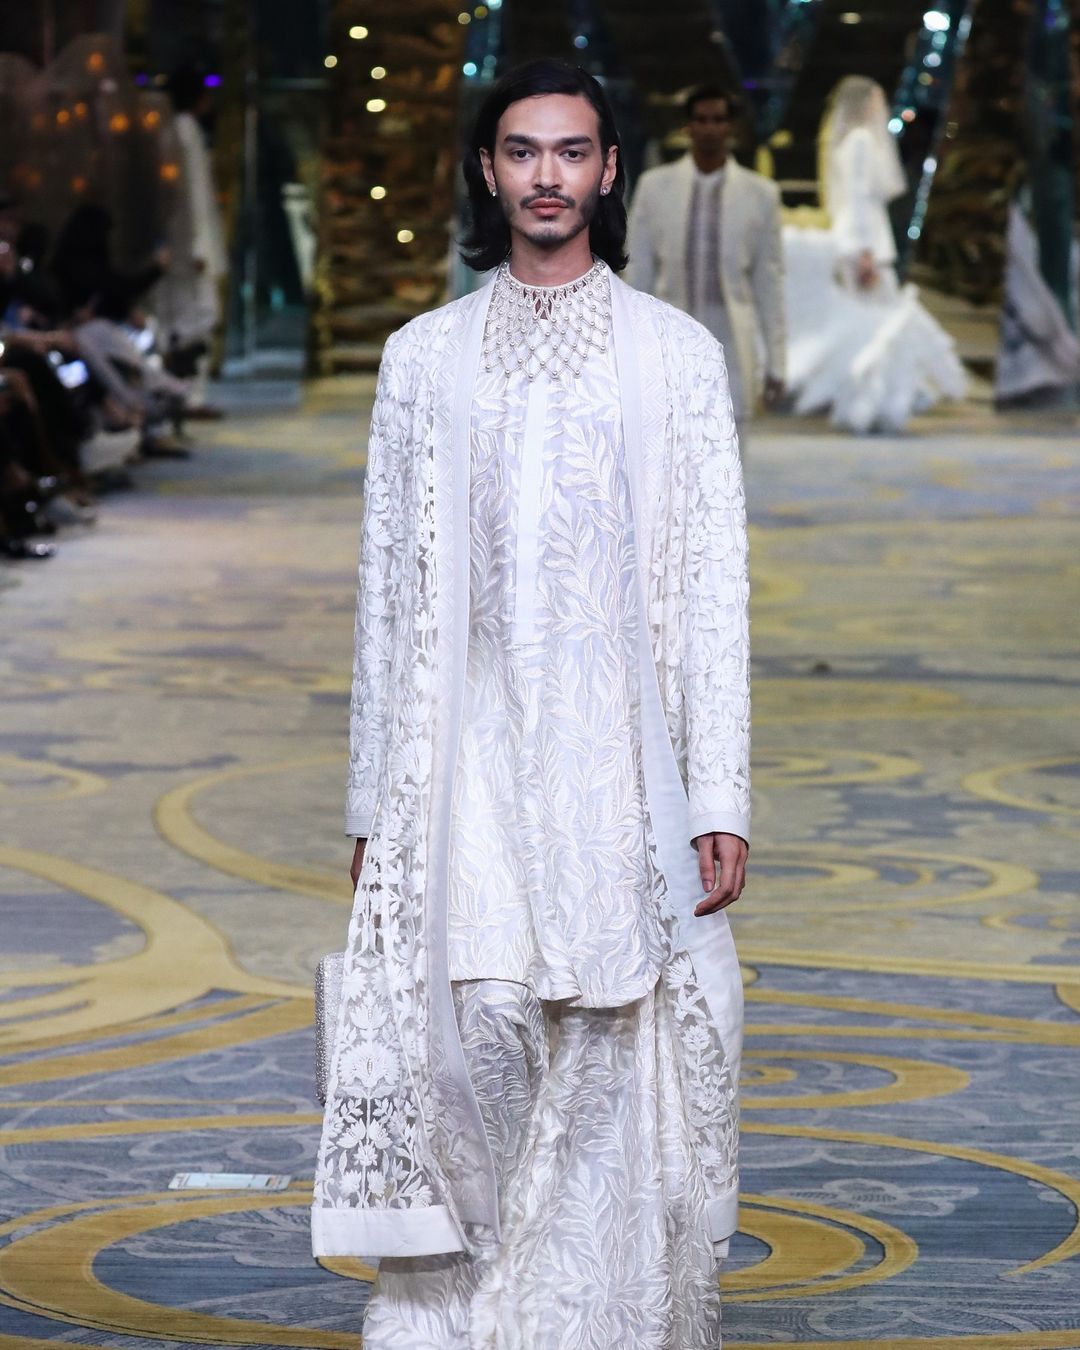 Manish Malhotra Heralds In The Era Of The Bold Bride With His Latest Couture Collection: True artistry on full display here. Photo Credit: www.instagram.com